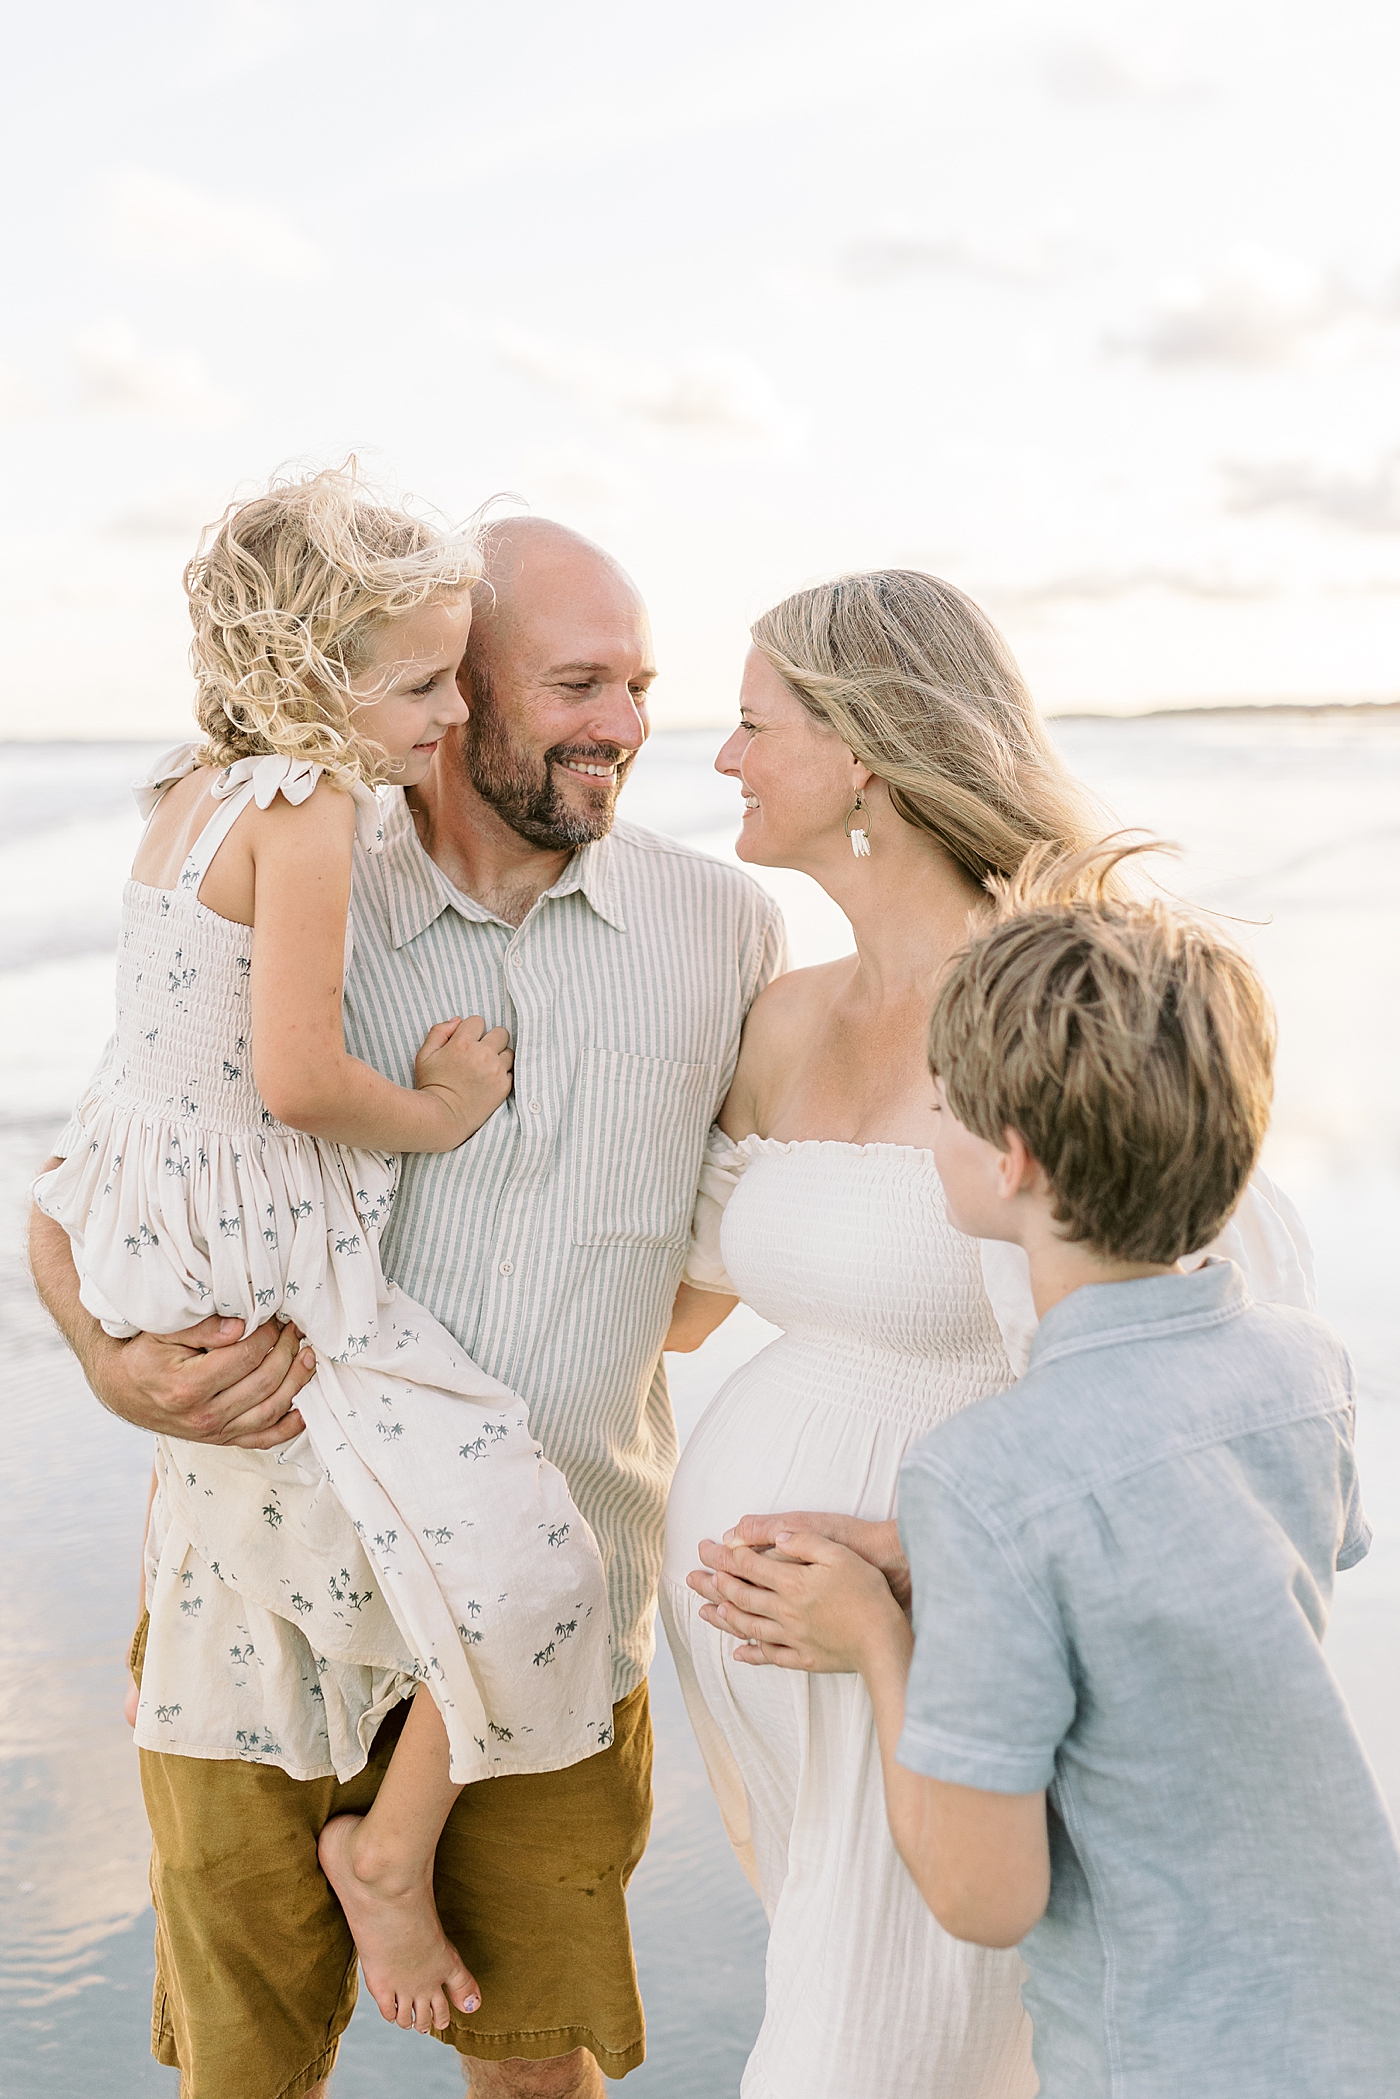 Family of four snuggling together during their Maternity Session at Folly Beach | Image by Caitlyn Motycka